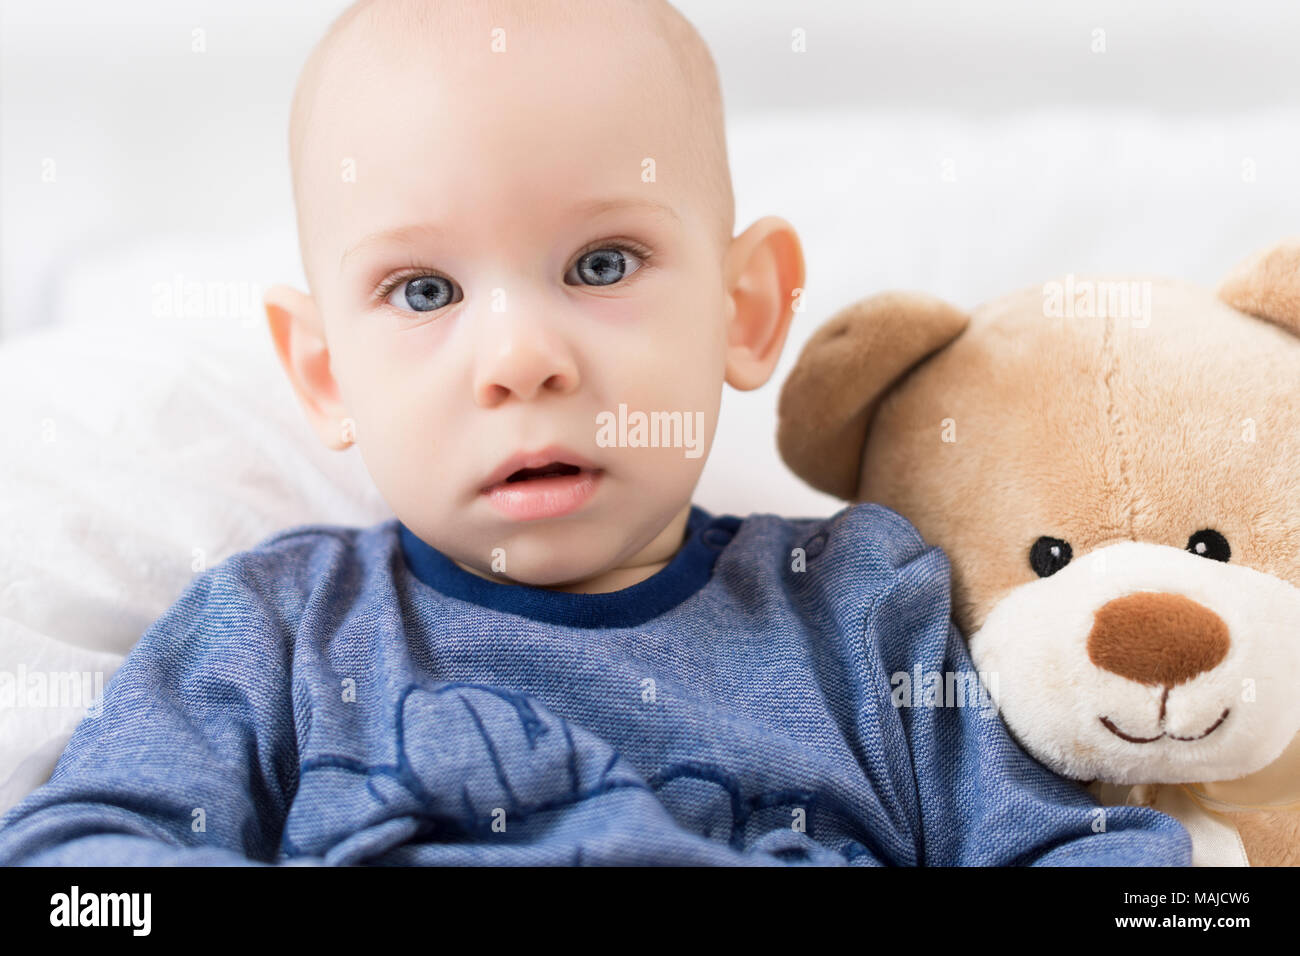 Adorable baby boy sitting on a bed, playing with toy bears on a bed. Newborn child relaxing on a bed. Family morning at home. Stock Photo